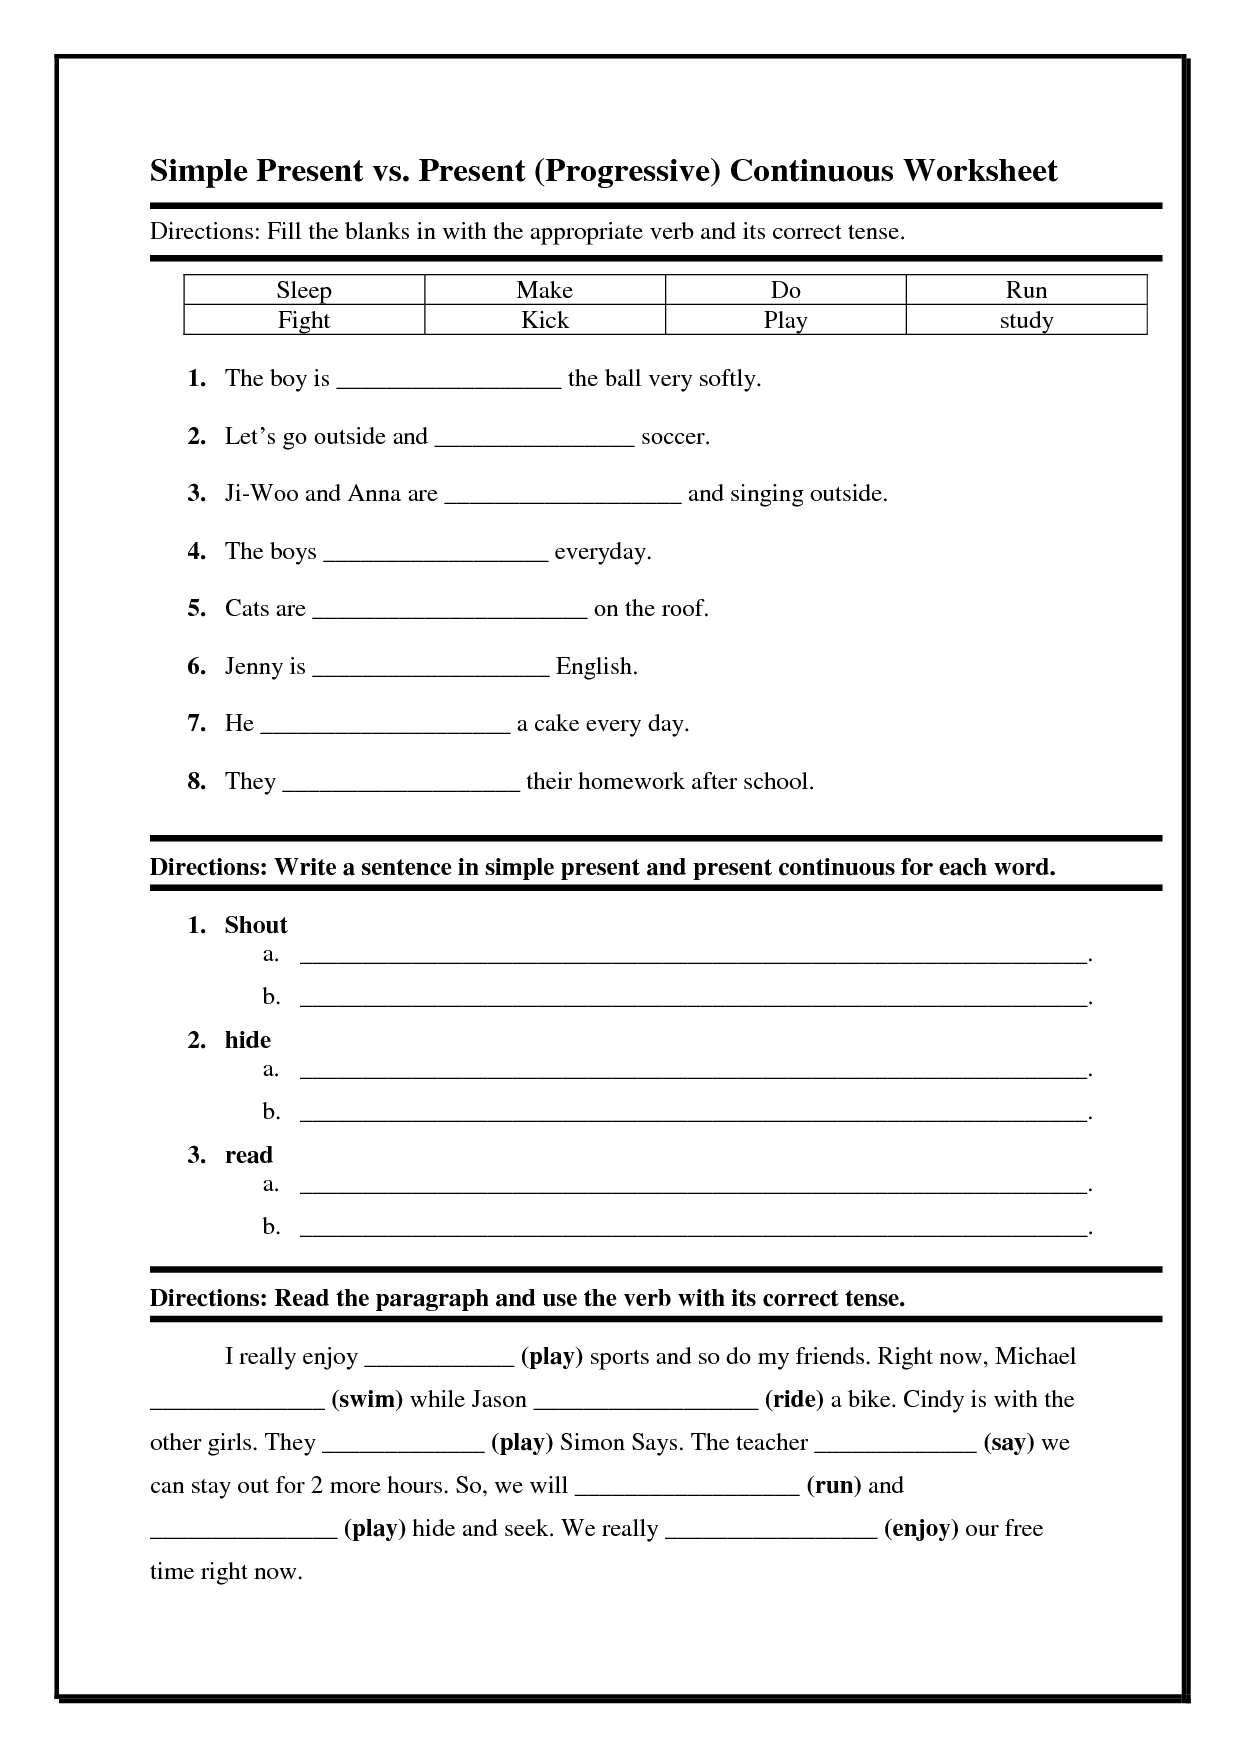 17 Best Images Of English Future Tense Worksheets Future Tense 